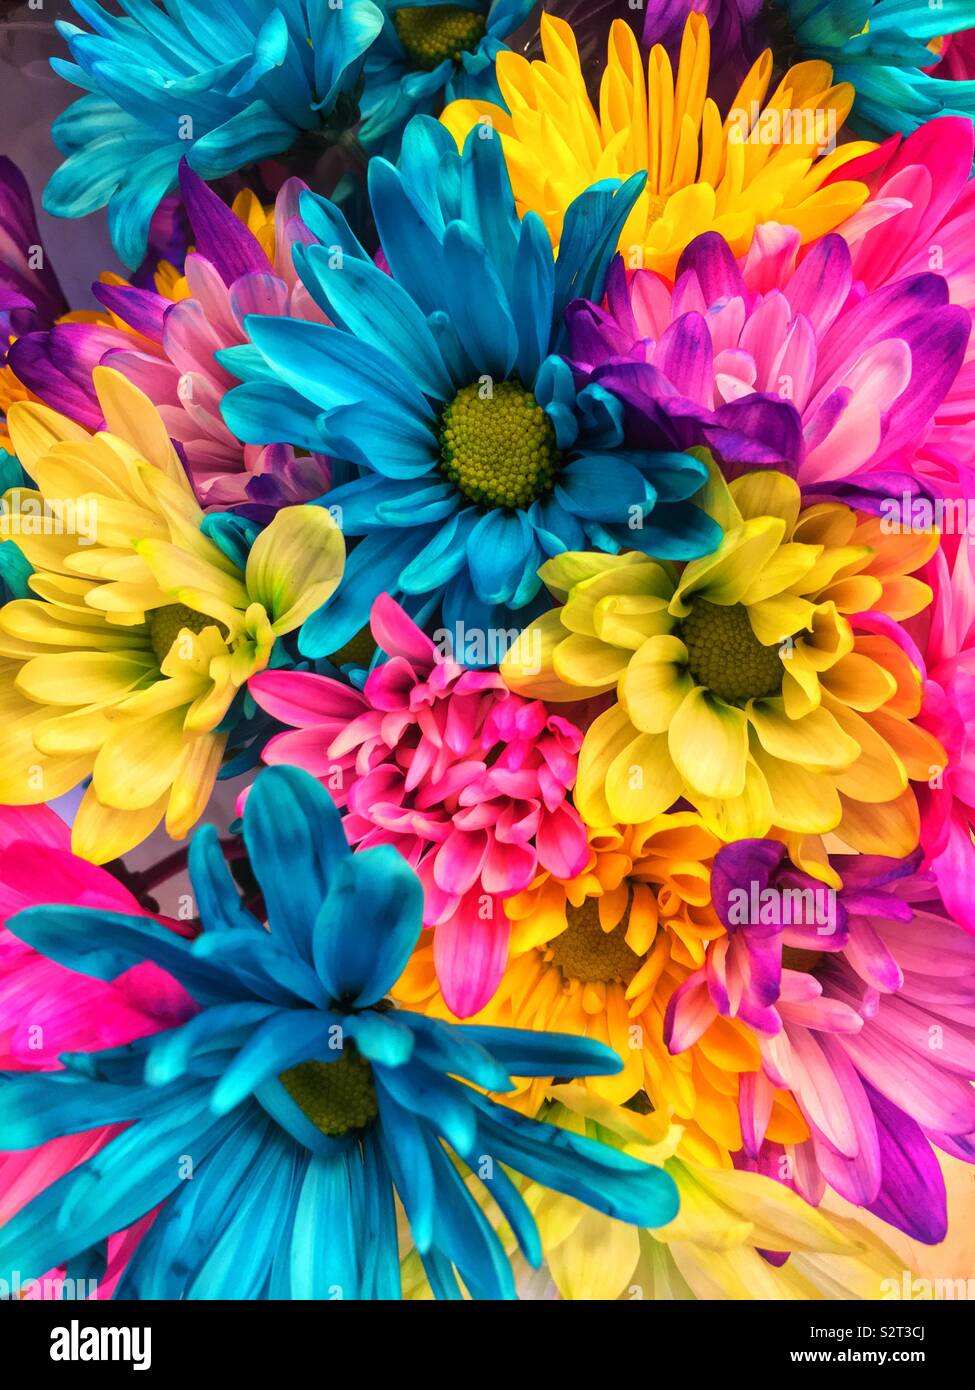 Beautiful bouquet of fresh colorful pink, blue, and yellow daisies. Stock Photo